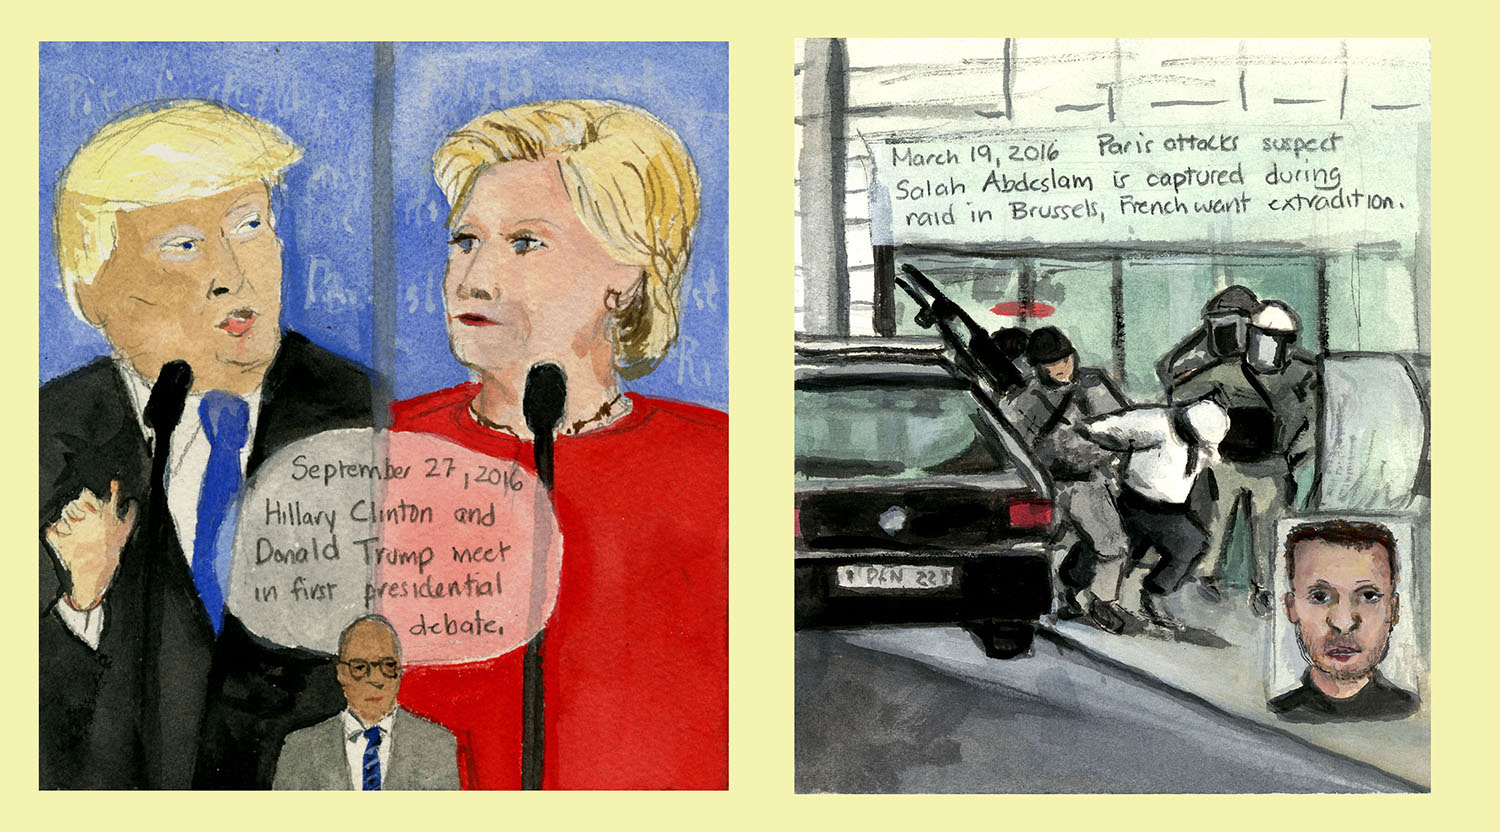 
(LEFT): Day 311 (Sept. 27, 2016). Watercolor, gouache, graphite on paper, 6 x 5 ½ in. <i>Hillary Clinton and Donald Trump meet in first presidential debate.</i> (RIGHT): Day 119 (March 19, 2016). Watercolor, gouache, graphite on paper, 7 x 6 in. <i>Paris attacks suspect Salah Abdeslam is captured during raid in Brussels, French want extradition.</i>